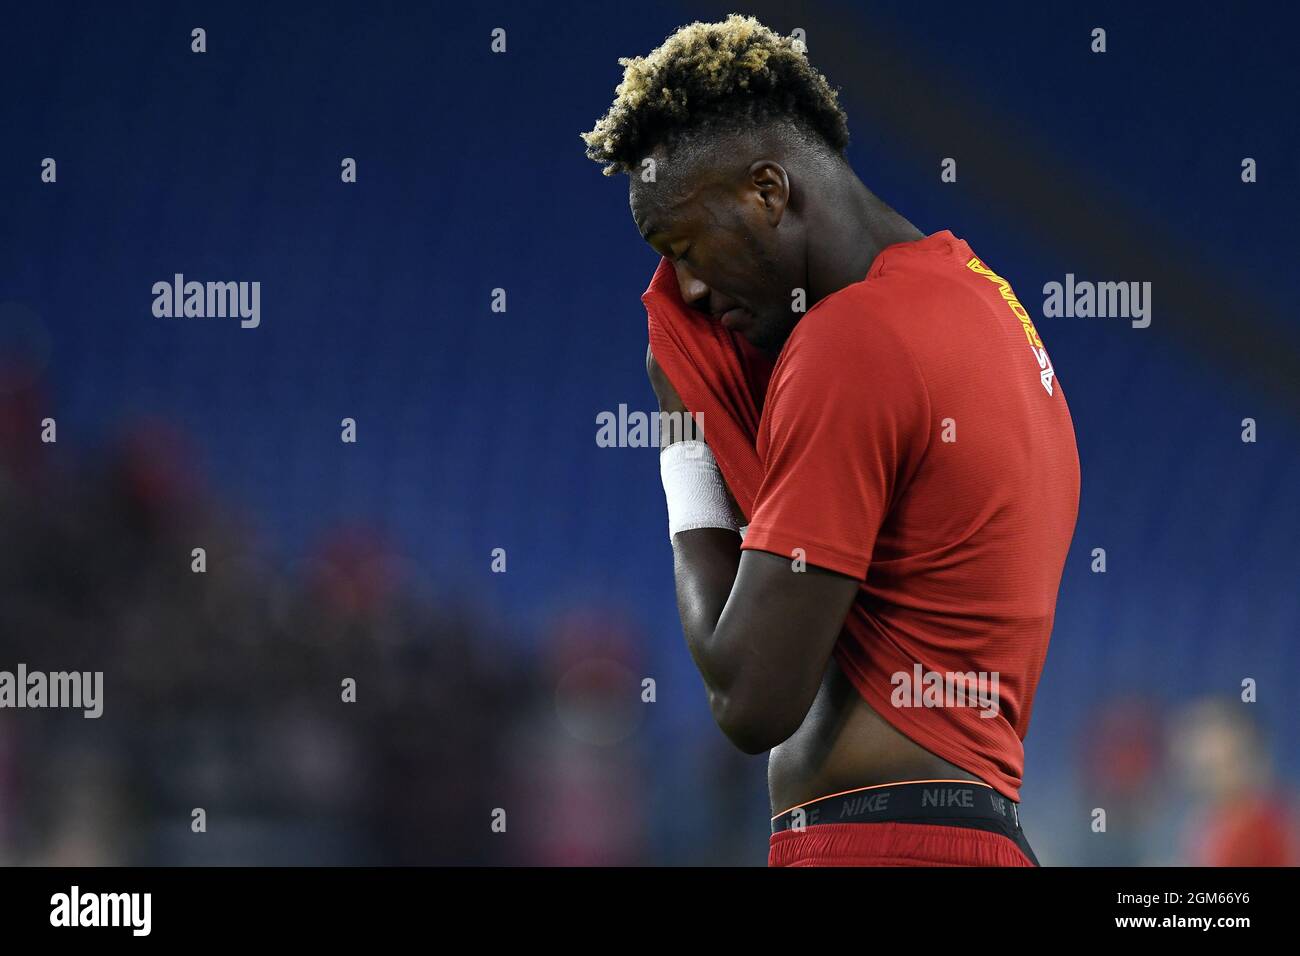 Rome, Lazio. 16th Sep, 2021. Tammy Abraham of AS Roma during the Conference League match between AS Roma v CSKA Sofia at Olimpico stadium in Rome, Italy, September 16, 2021. Fotografo01 Credit: Independent Photo Agency/Alamy Live News Stock Photo